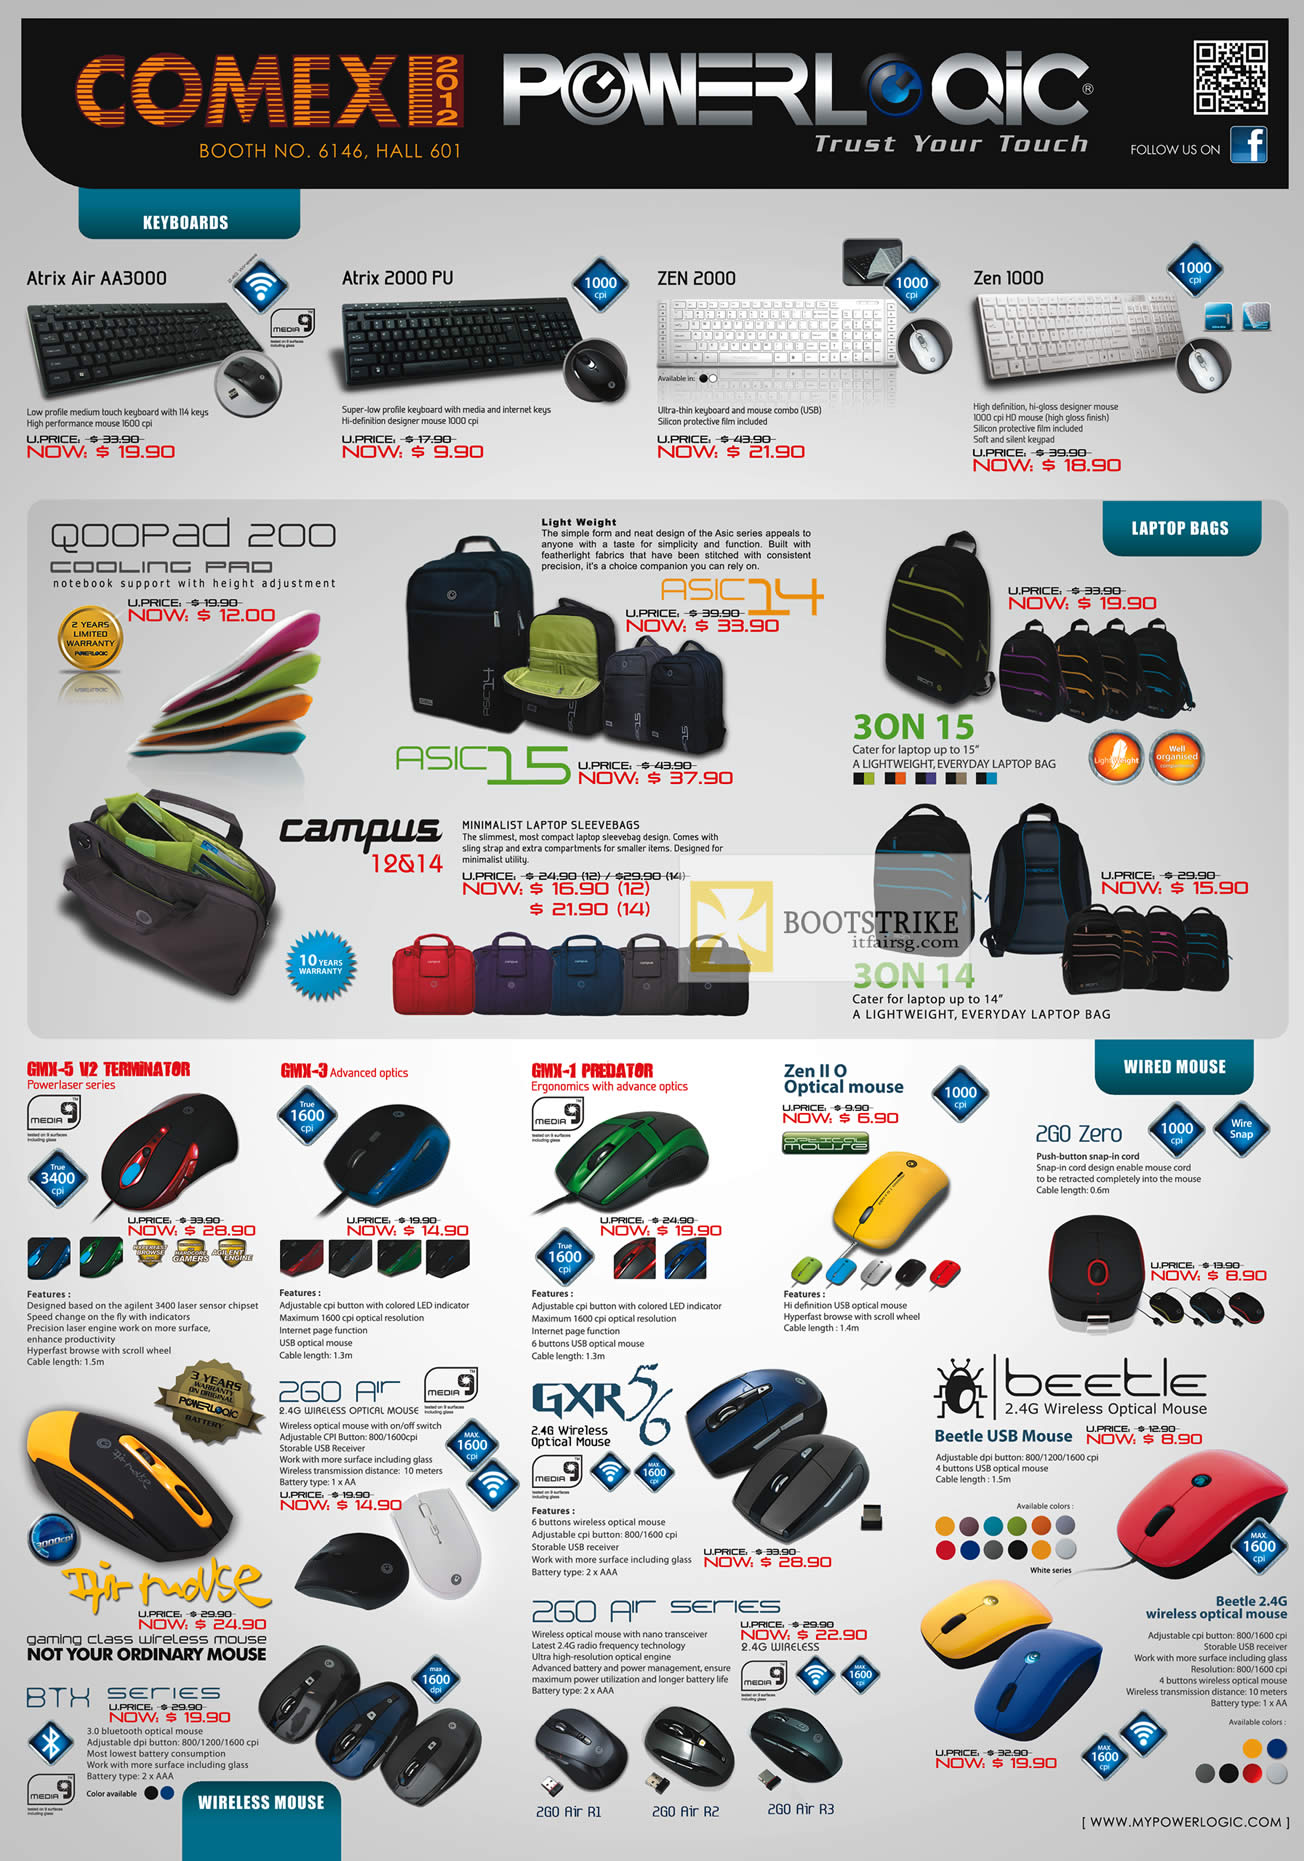 COMEX 2012 price list image brochure of Leap Frog Powerlogic Accessories Keyboard Atrix Air AA3000, 2000 Pu, Zen 2000, 1000, Cooling Pad, 3ON 15, Mouse GMX-5 V2 Terminator, Predator, Bettle, GXR, Air Mouse